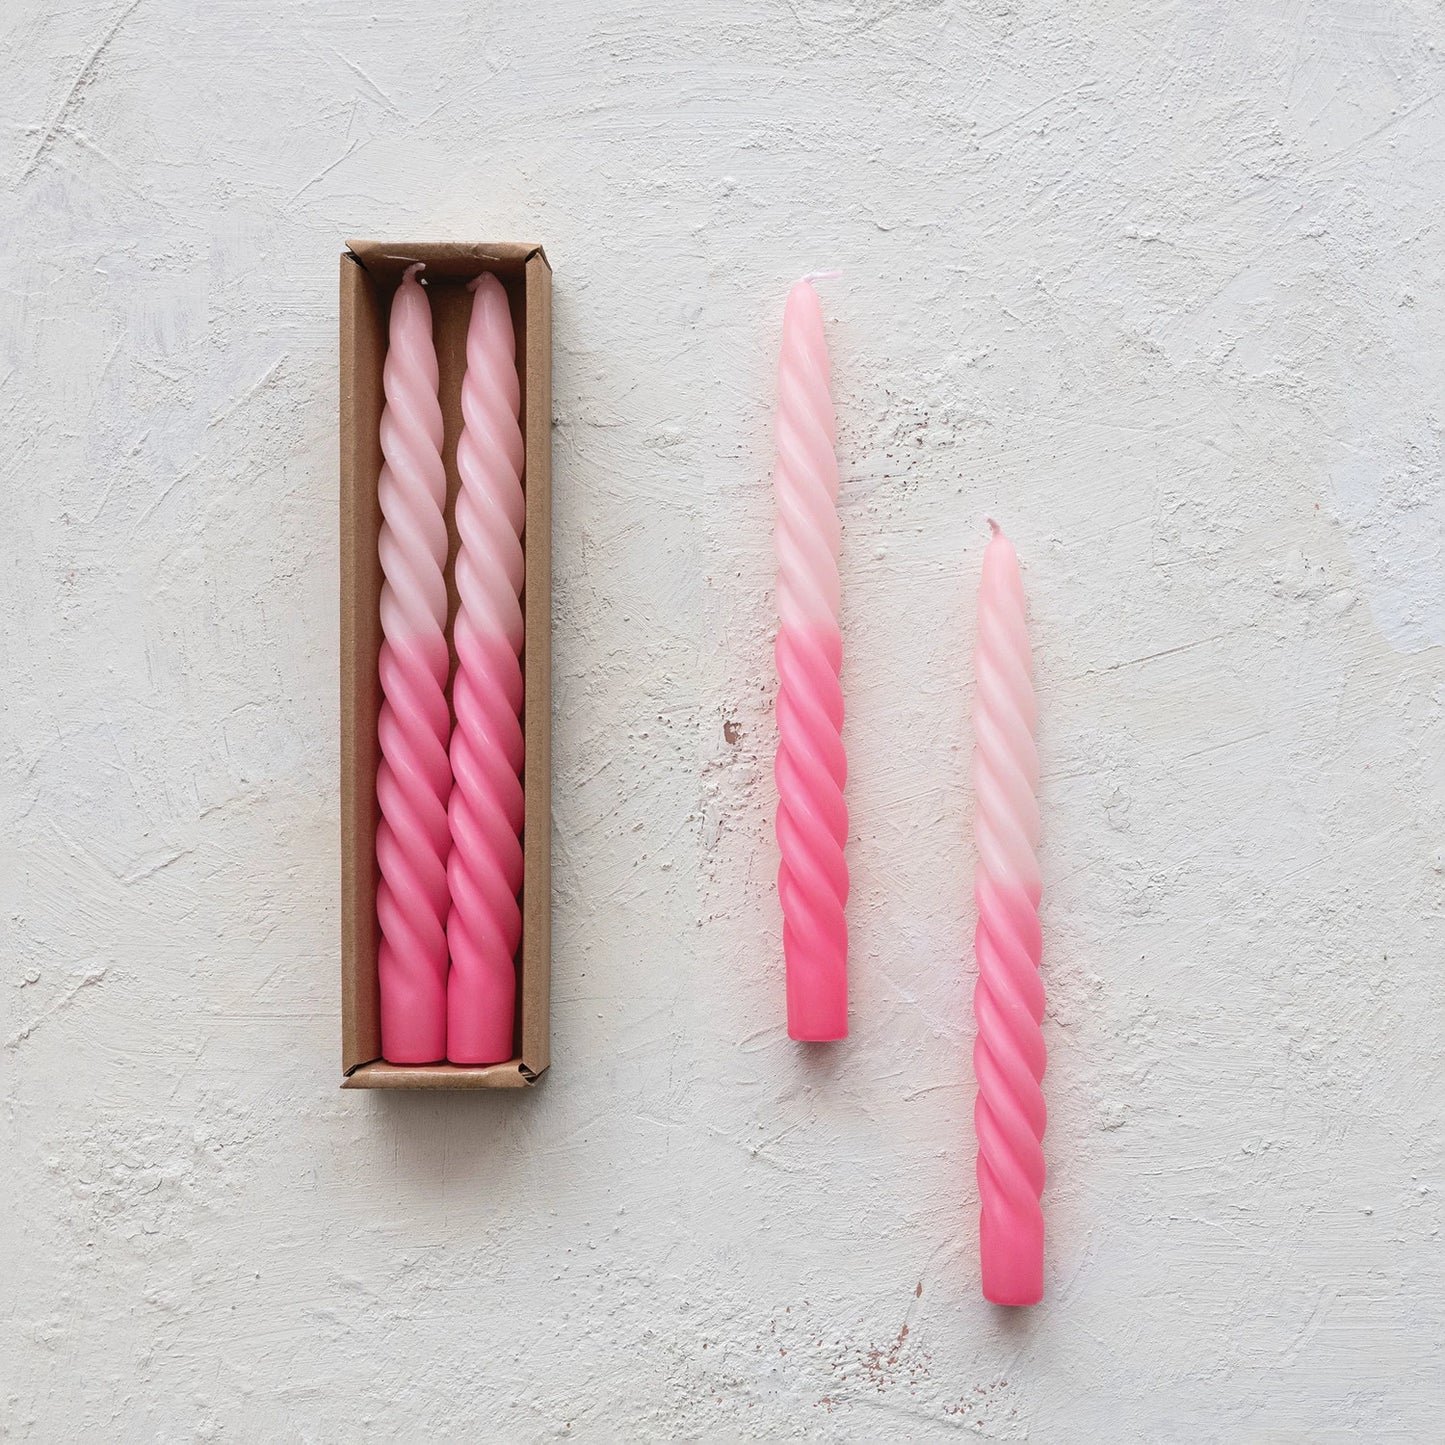 2 pink ombre twisted candles set next to a boxed set of candles on a plaster background.